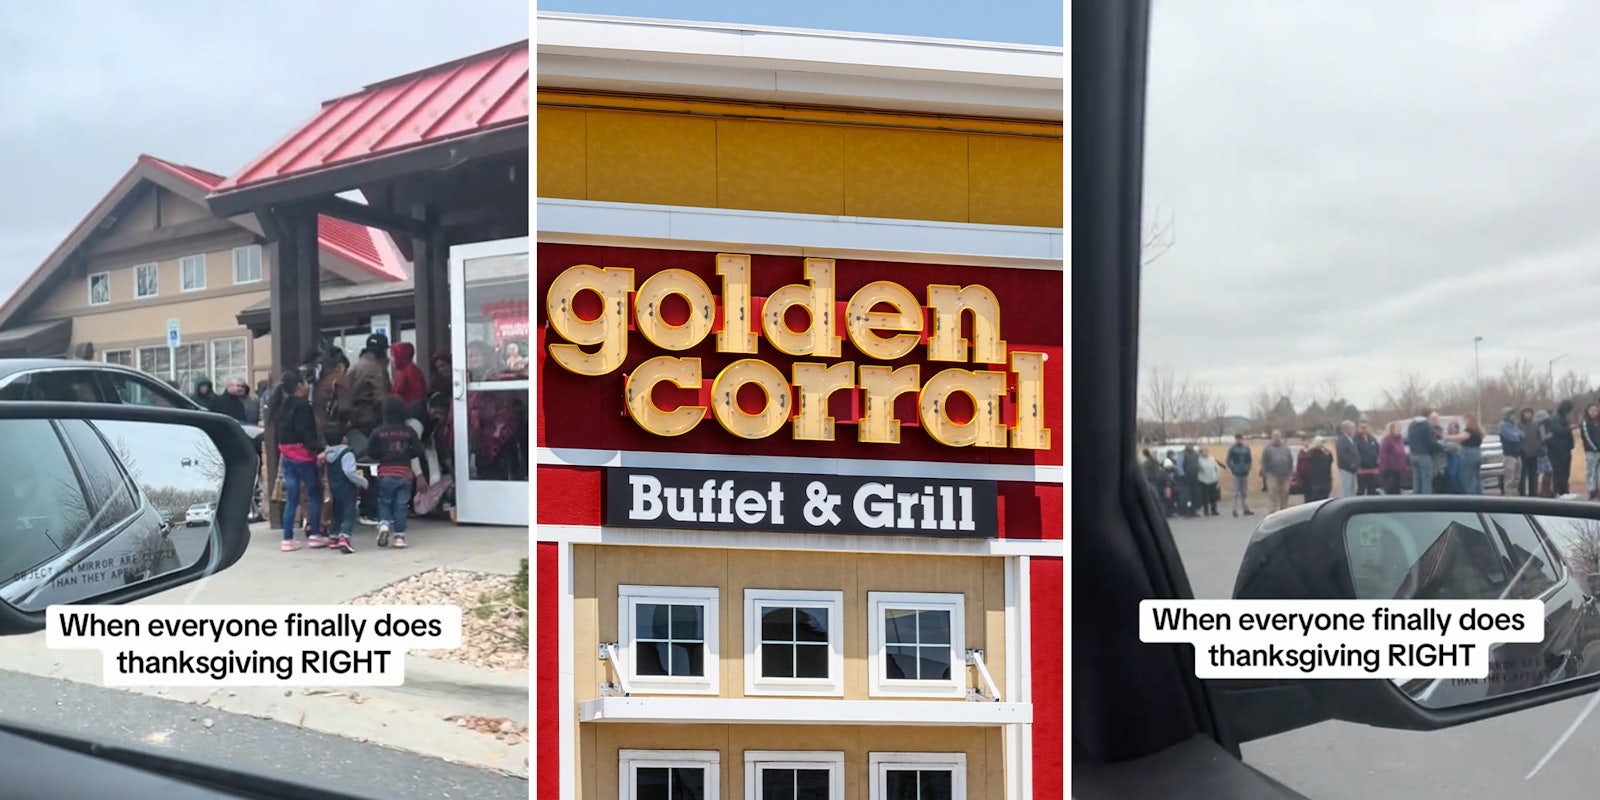 Customer sees giant holiday line for Golden Corral buffet.